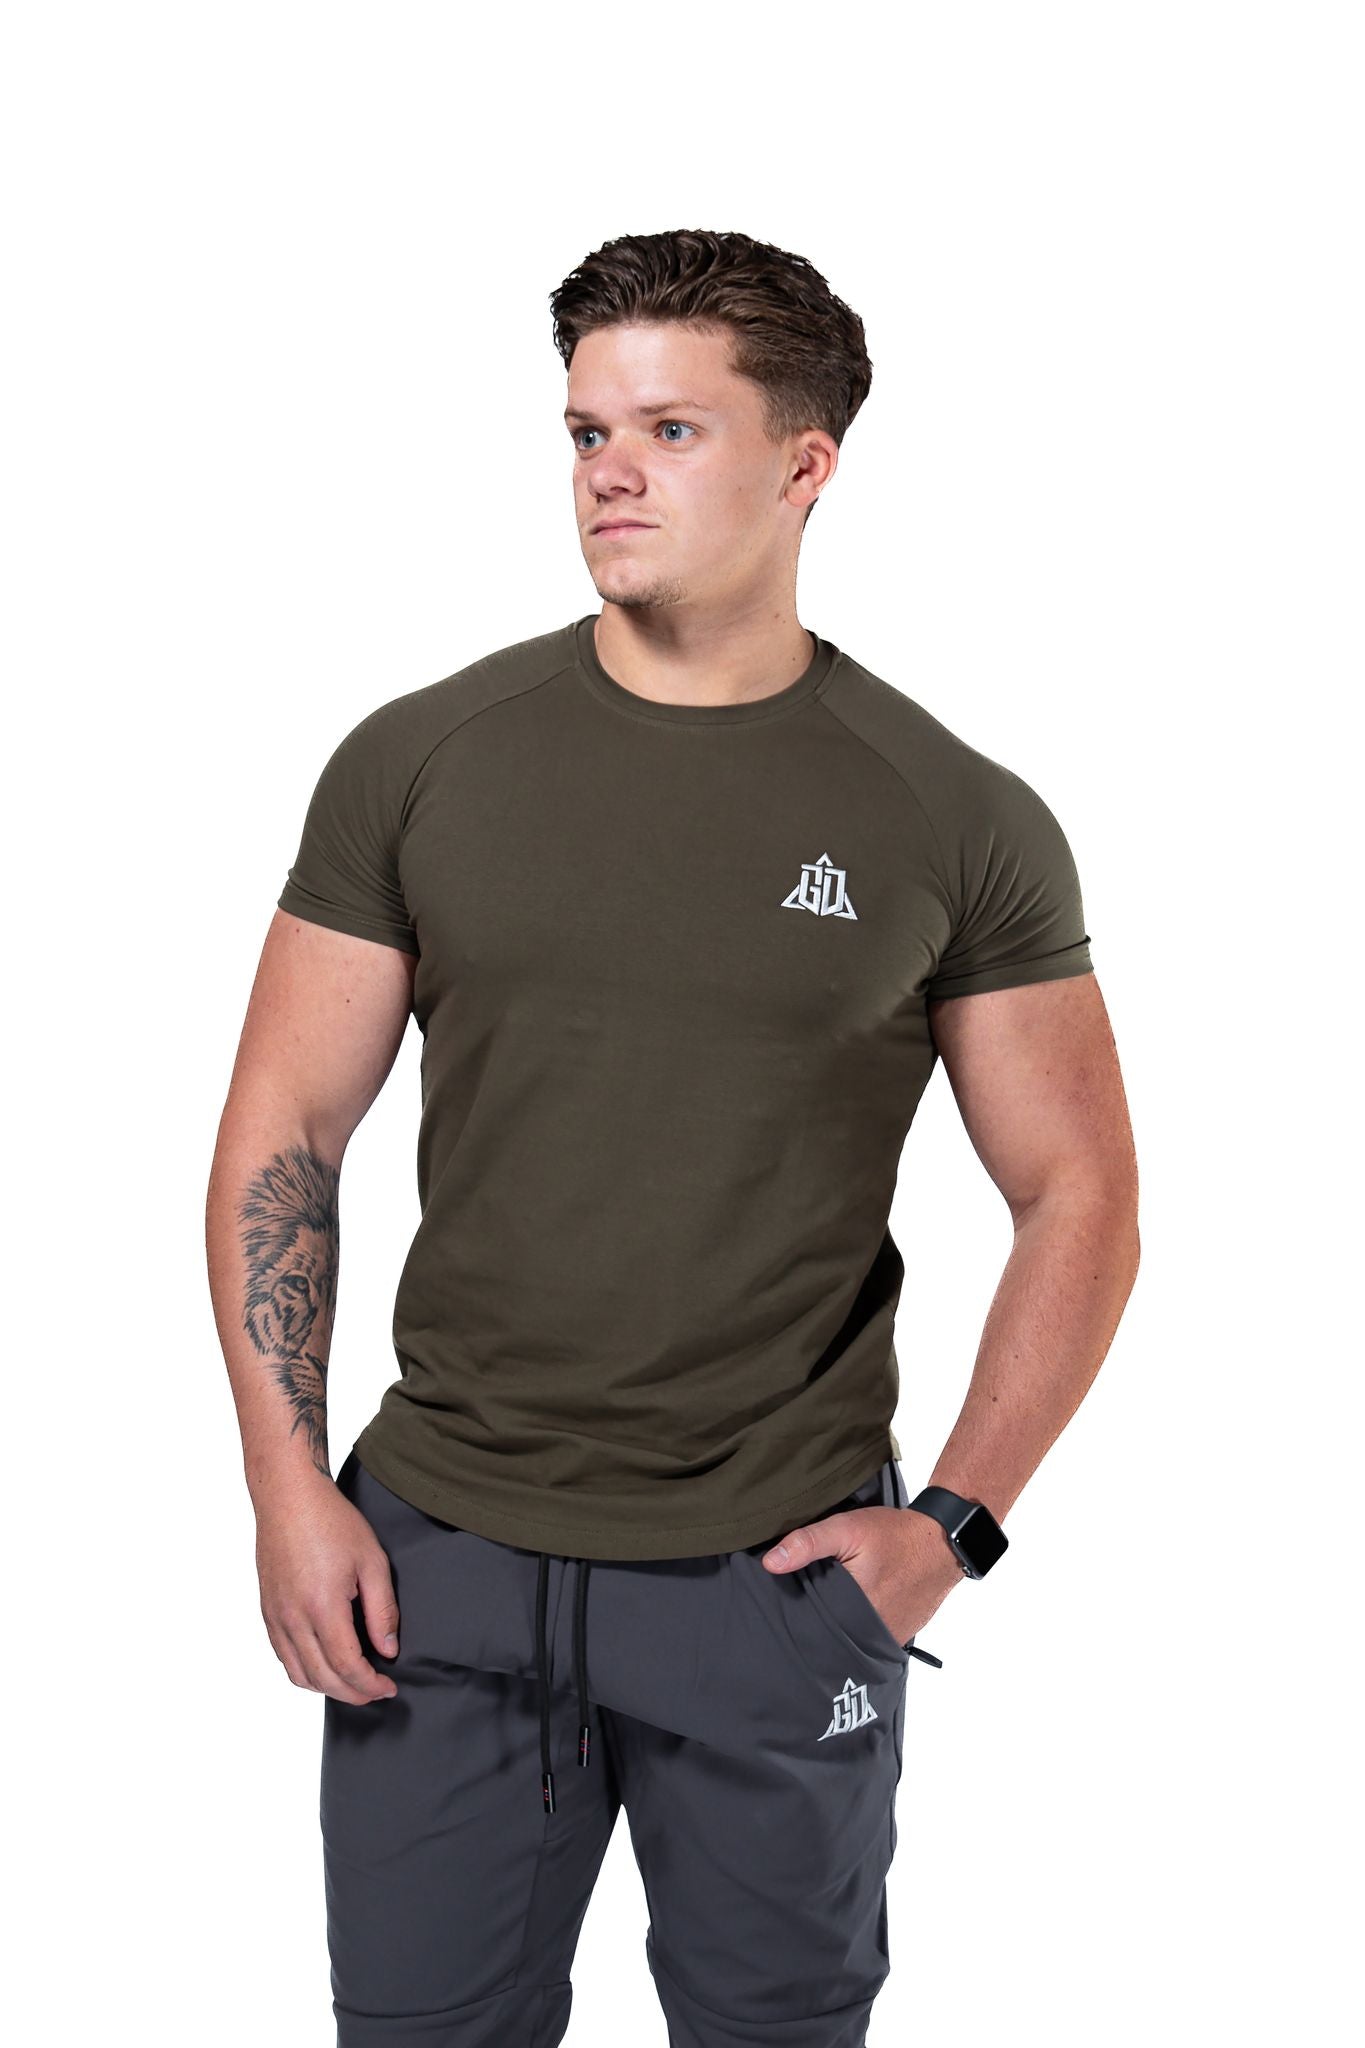 The Signature Curved Slim Green T-shirt